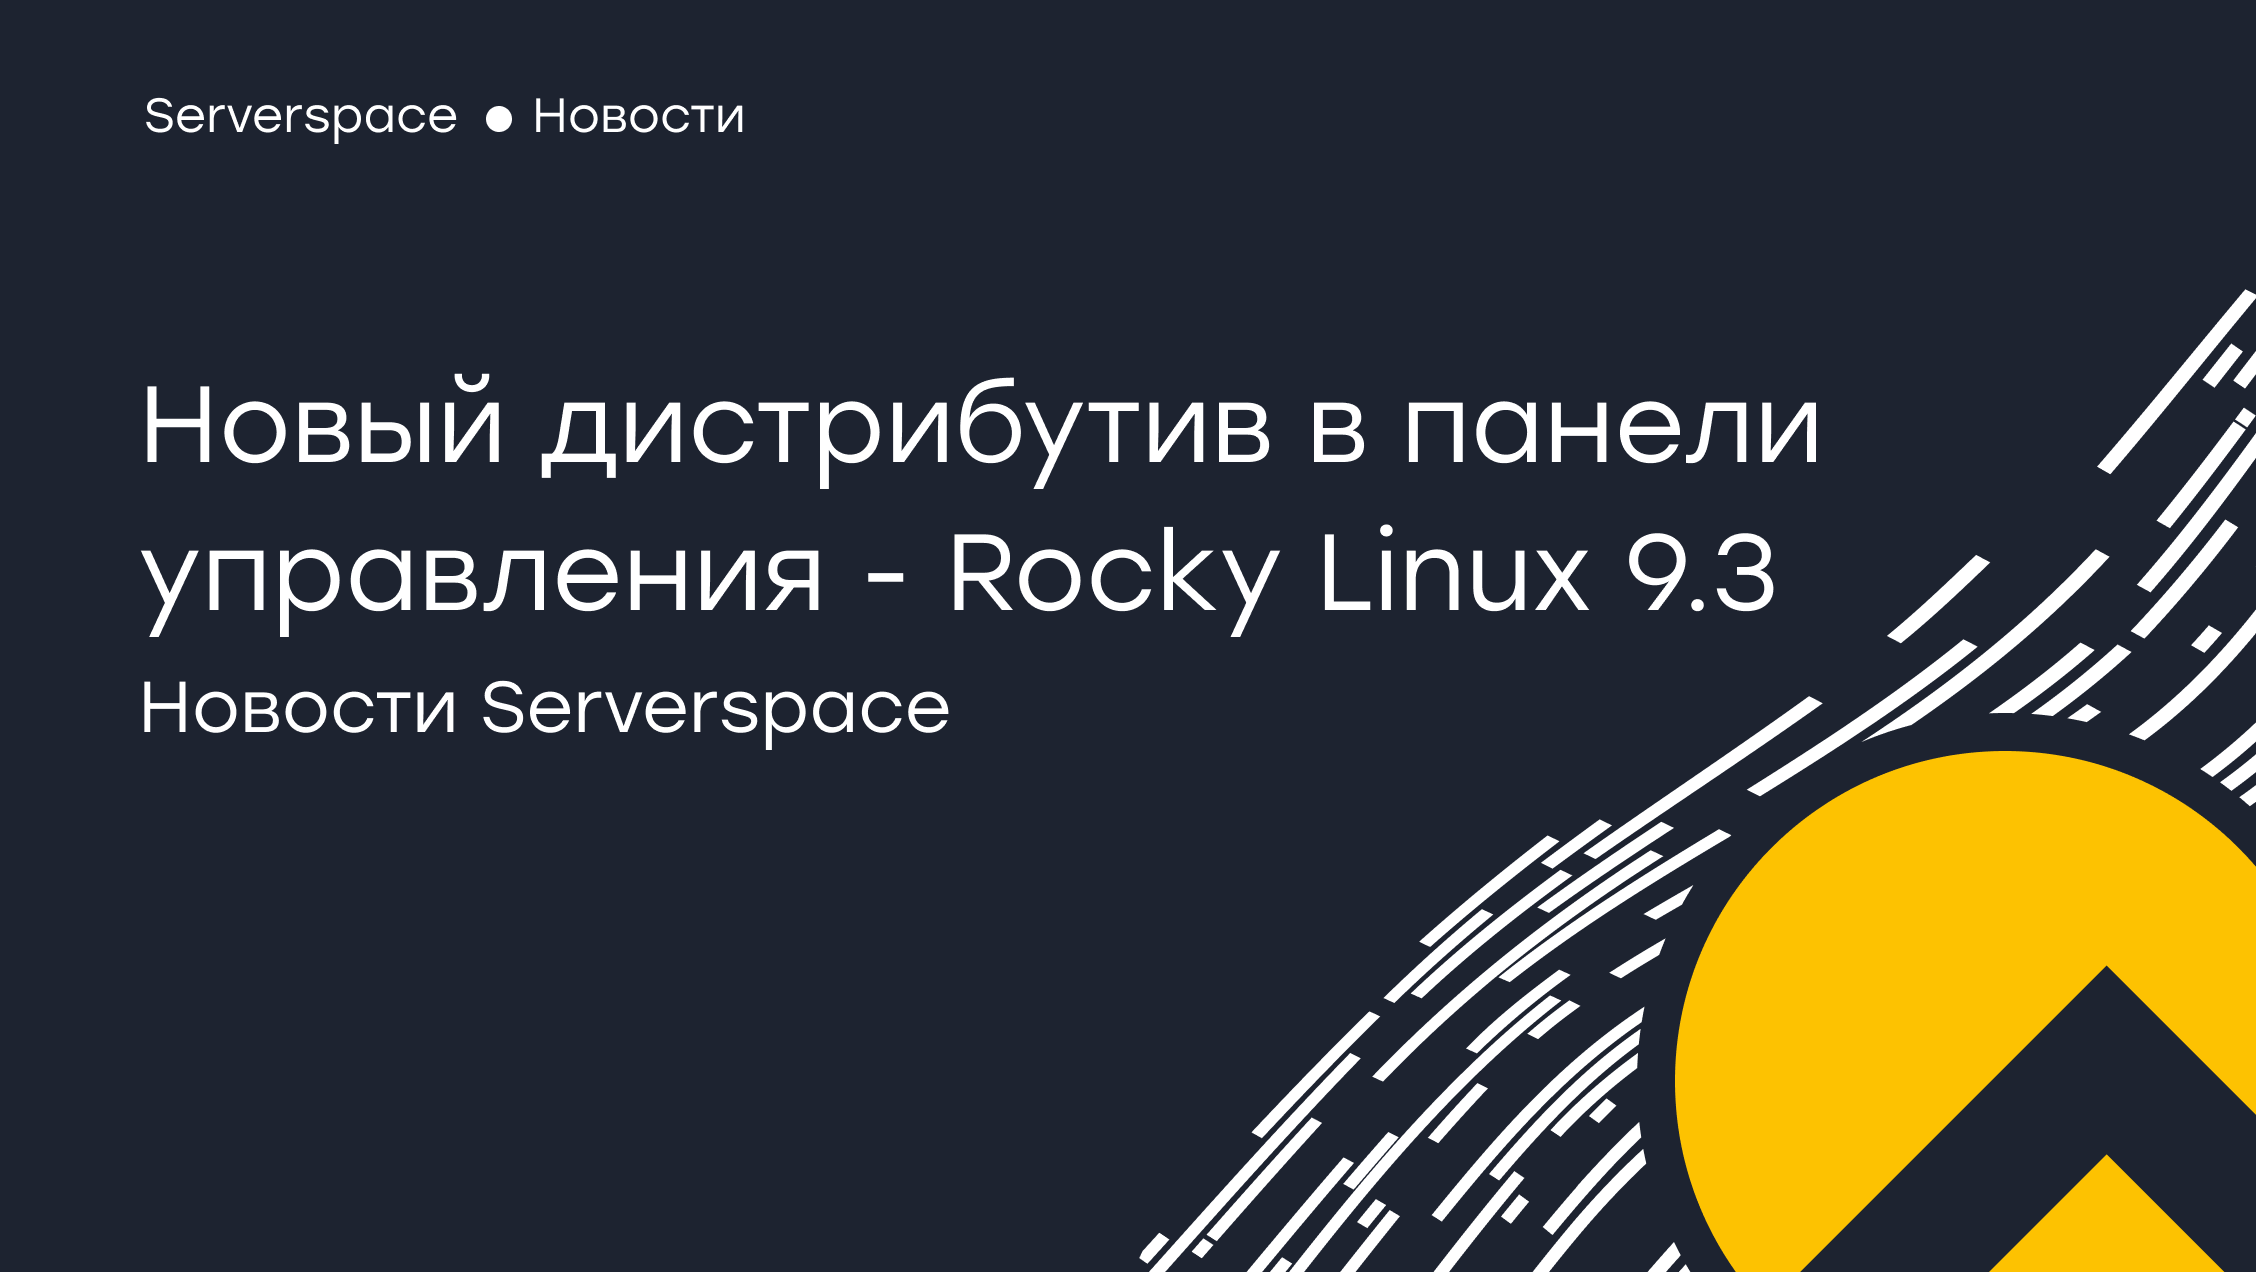 Serverspace has added support for the new Rocky Linux 9.3 distribution